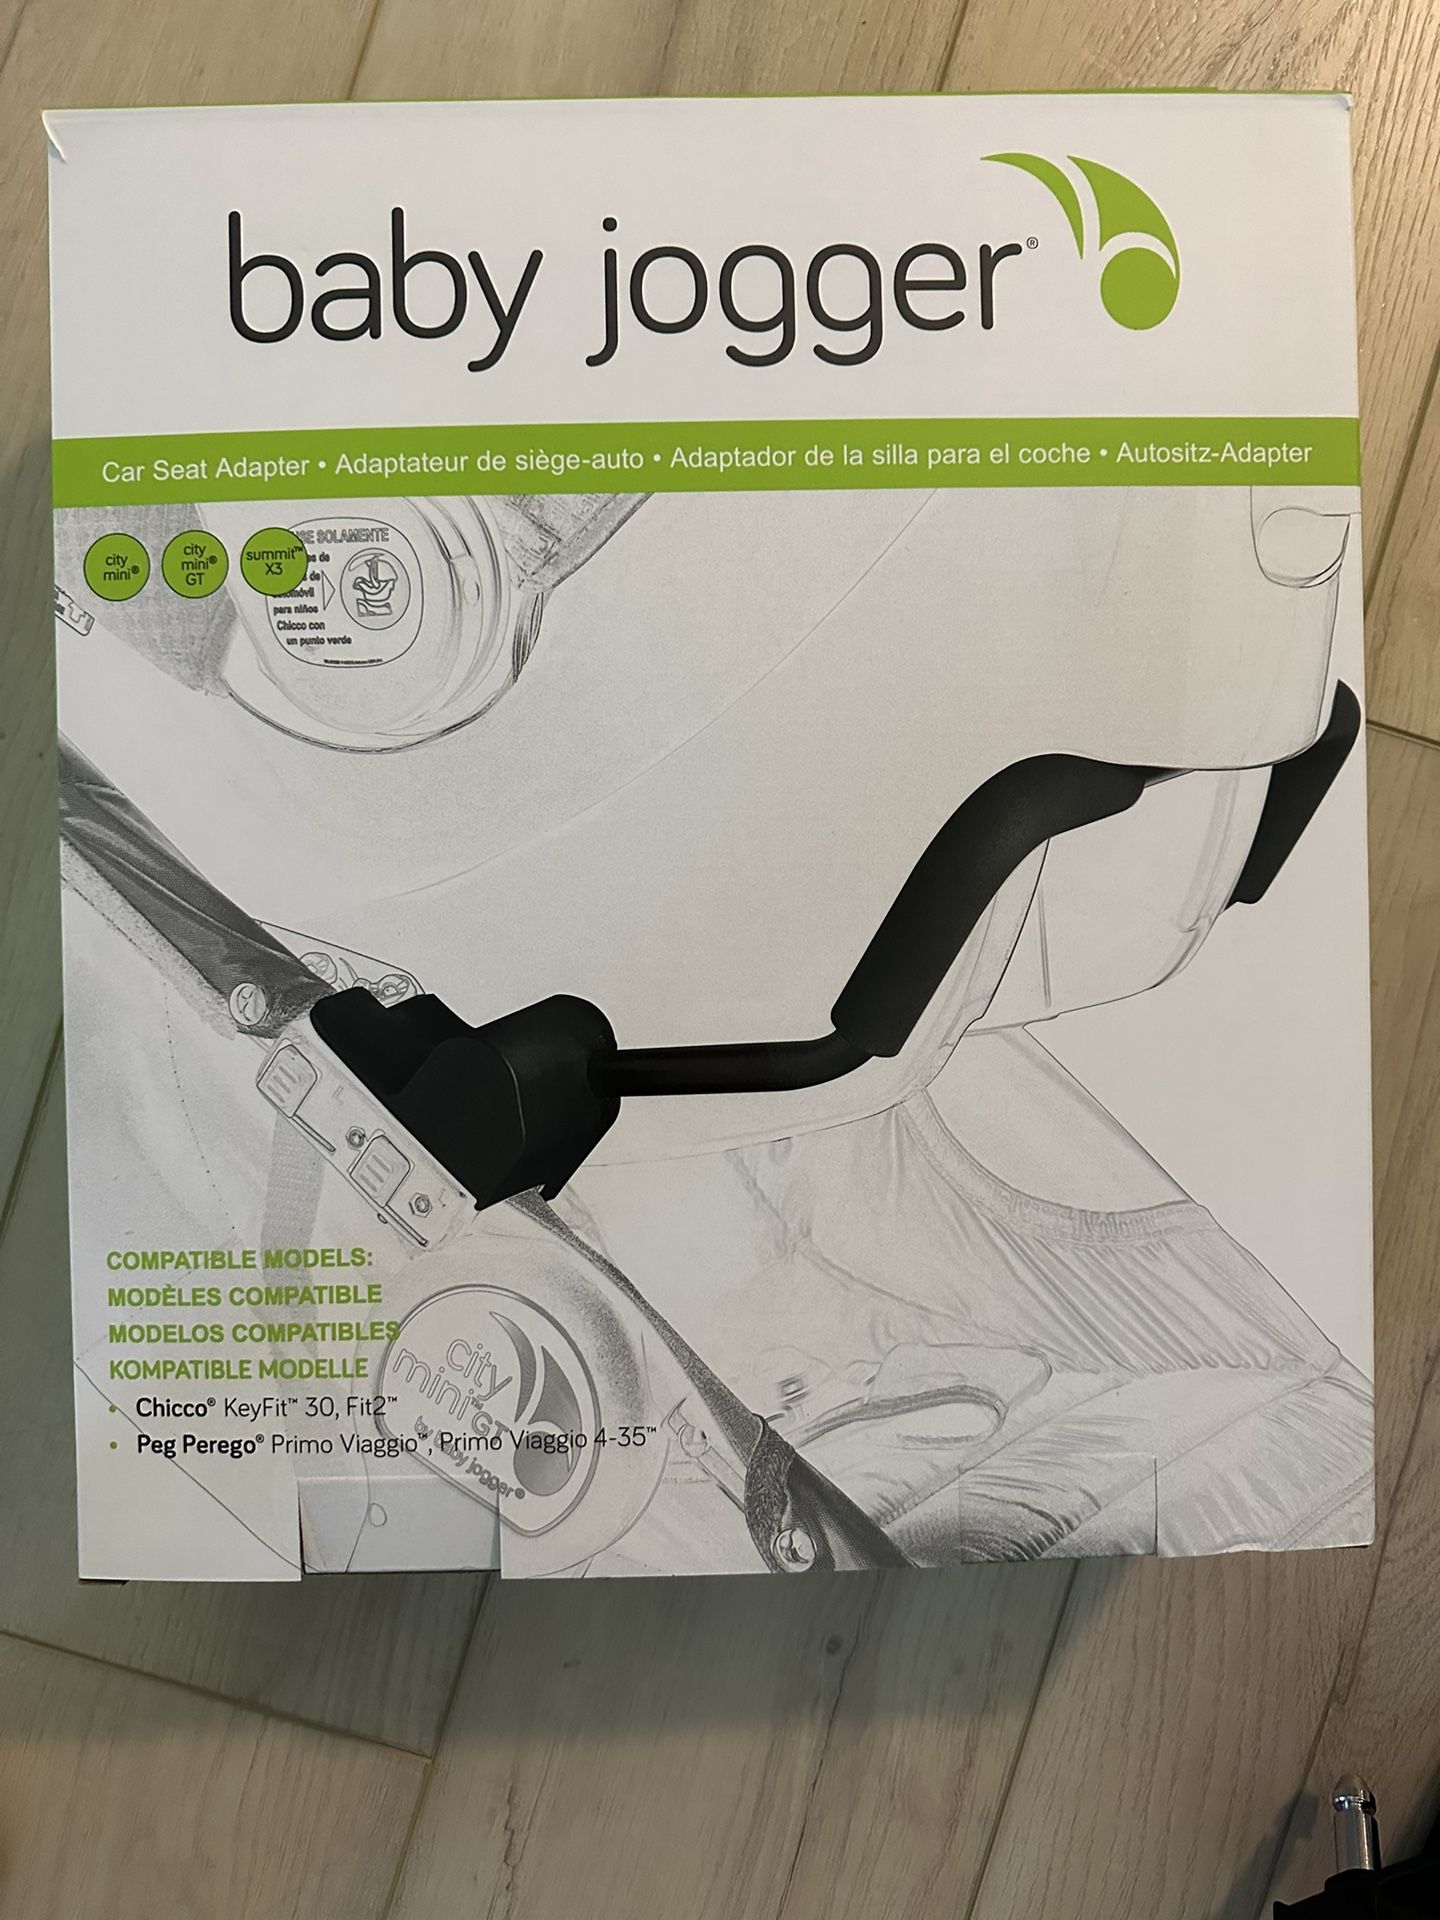 Baby Jogger Car Seat Adapter For Chicco Keyfit 30 and Peg Perego